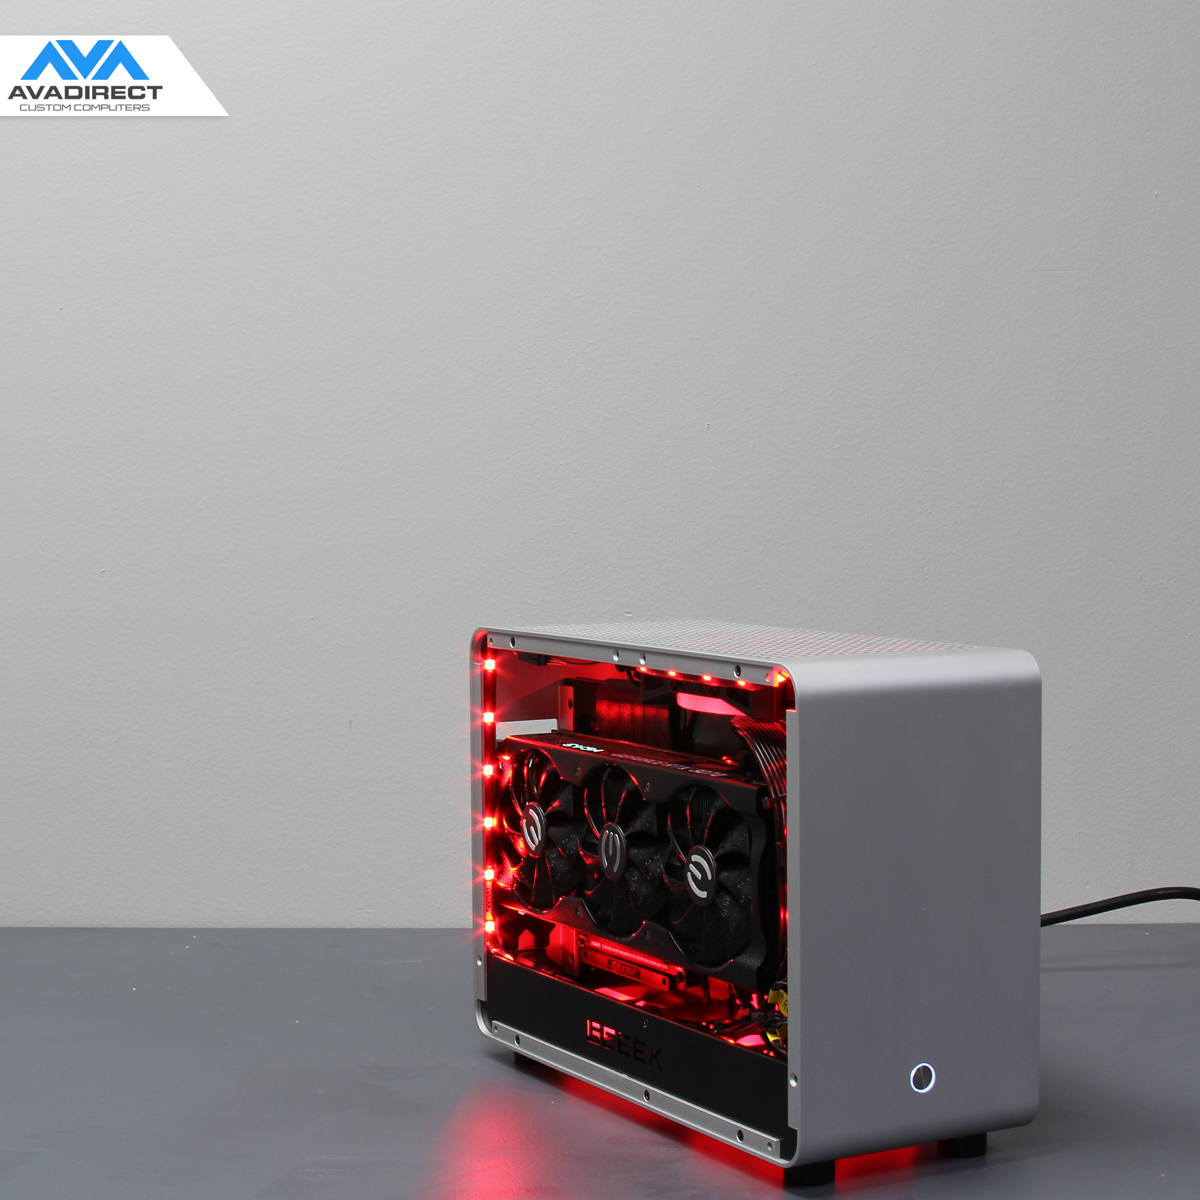 powerful ultra small gaming pc